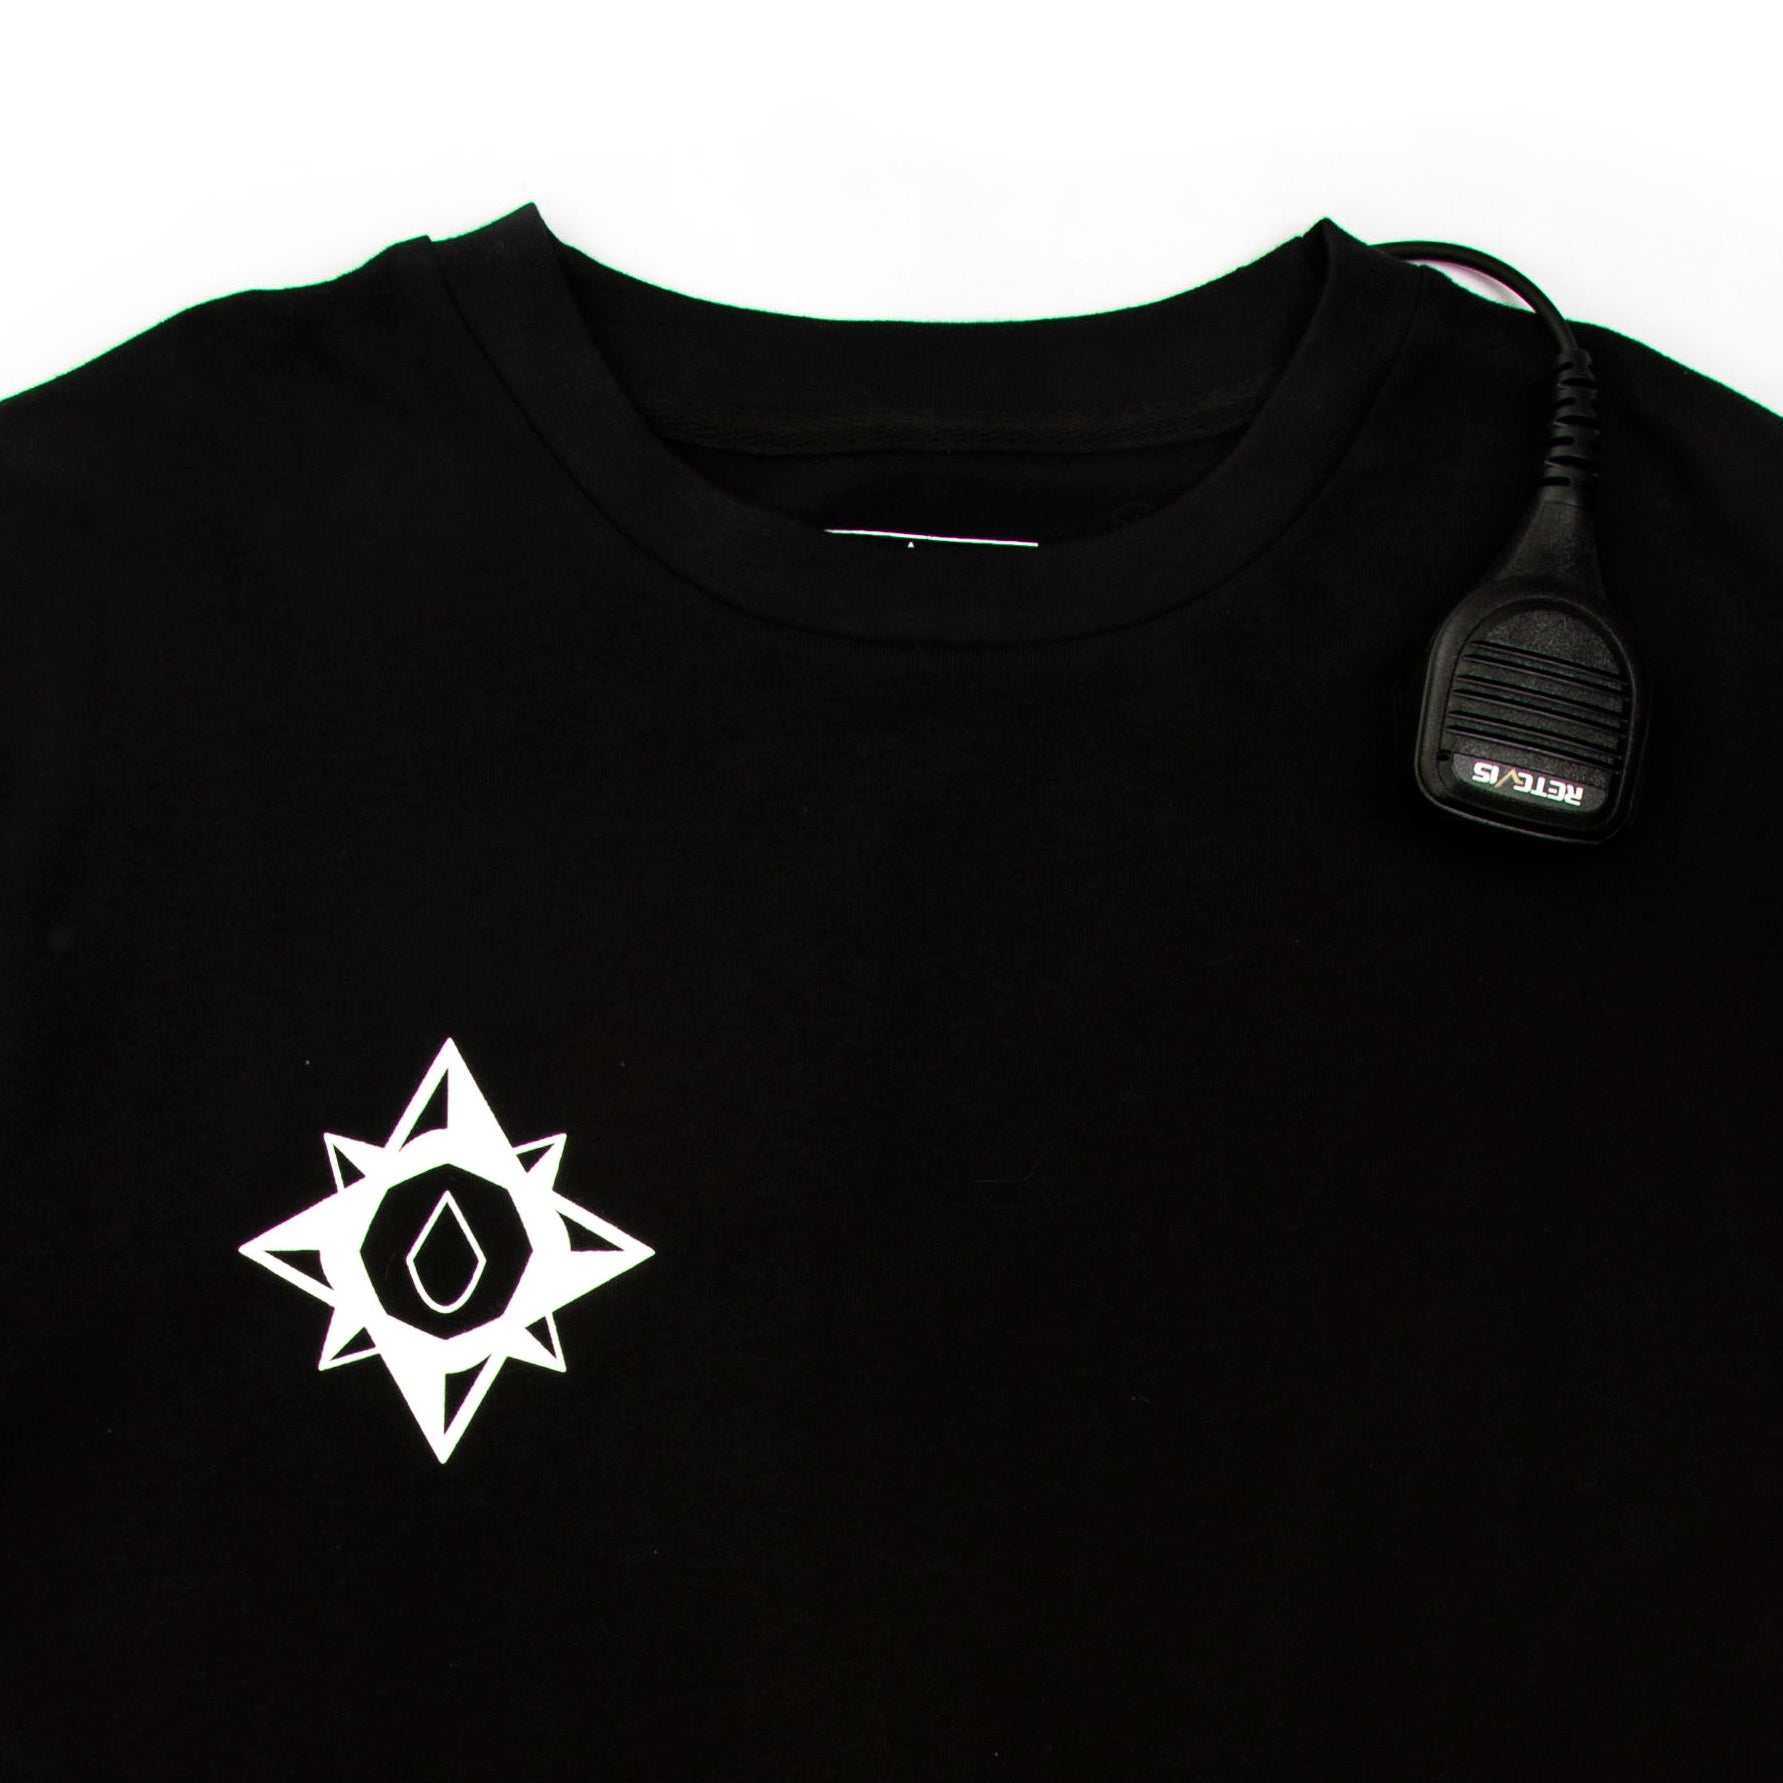 The Original SHOWDAY T-Shirt + MIDNIGHT Carabina (Limited Edition Artist Series - NOMAD)